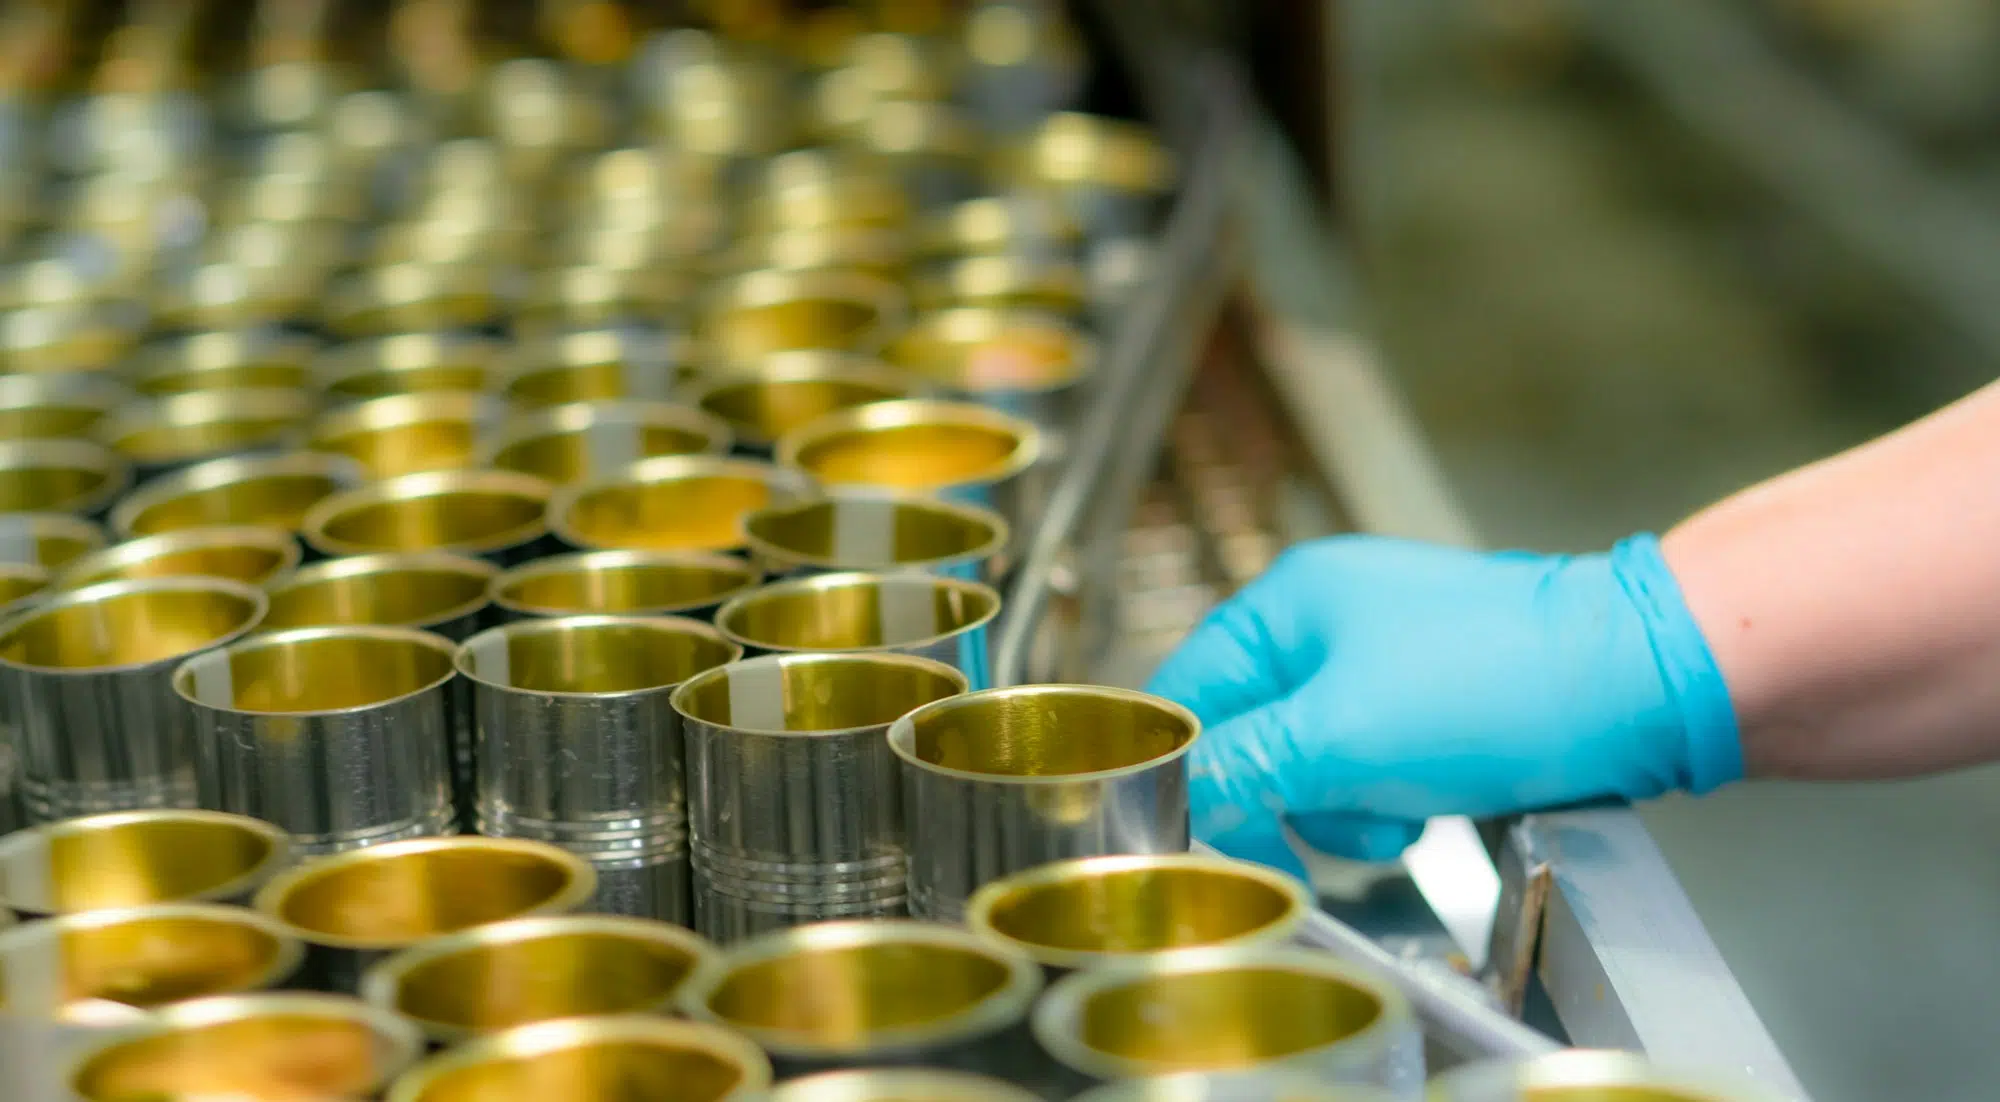 Selective focus on canned fish factory. Food industry. Food processing production line. Food